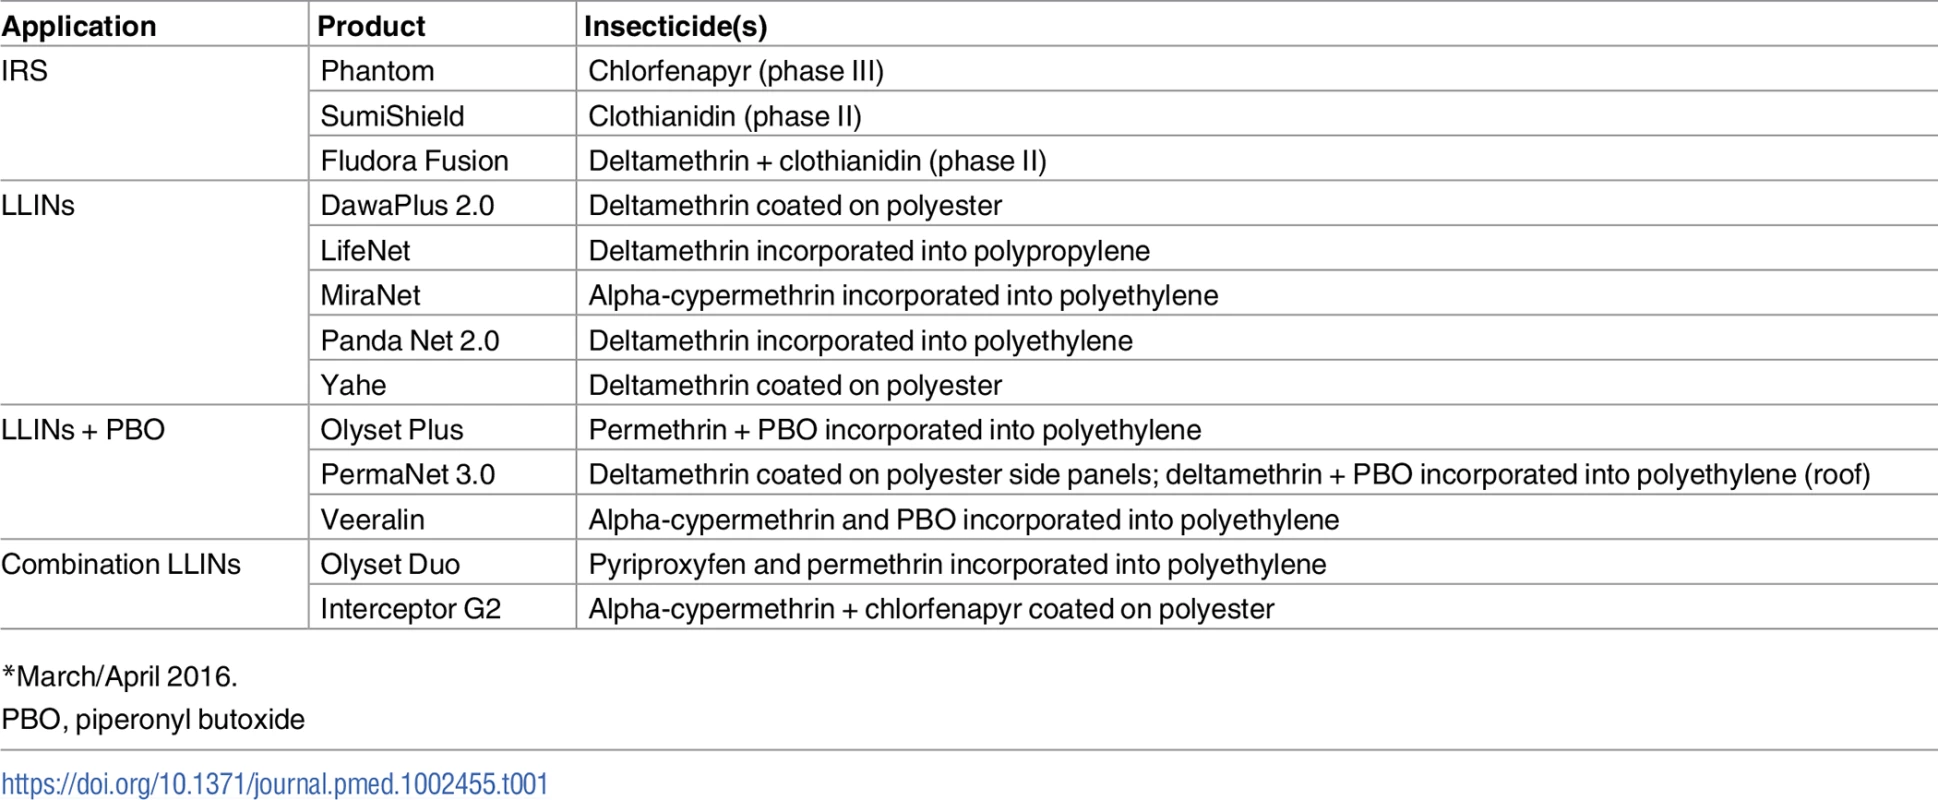 Insecticides for indoor residual spraying (IRS) under World Health Organization Pesticide Evaluation Scheme (WHOPES) evaluation and long-lasting insecticidal nets (LLINs) in late-stage development [<em class=&quot;ref&quot;>39</em>–<em class=&quot;ref&quot;>41</em>,<em class=&quot;ref&quot;>177</em>,<em class=&quot;ref&quot;>178</em>]<em class=&quot;ref&quot;>*</em>.